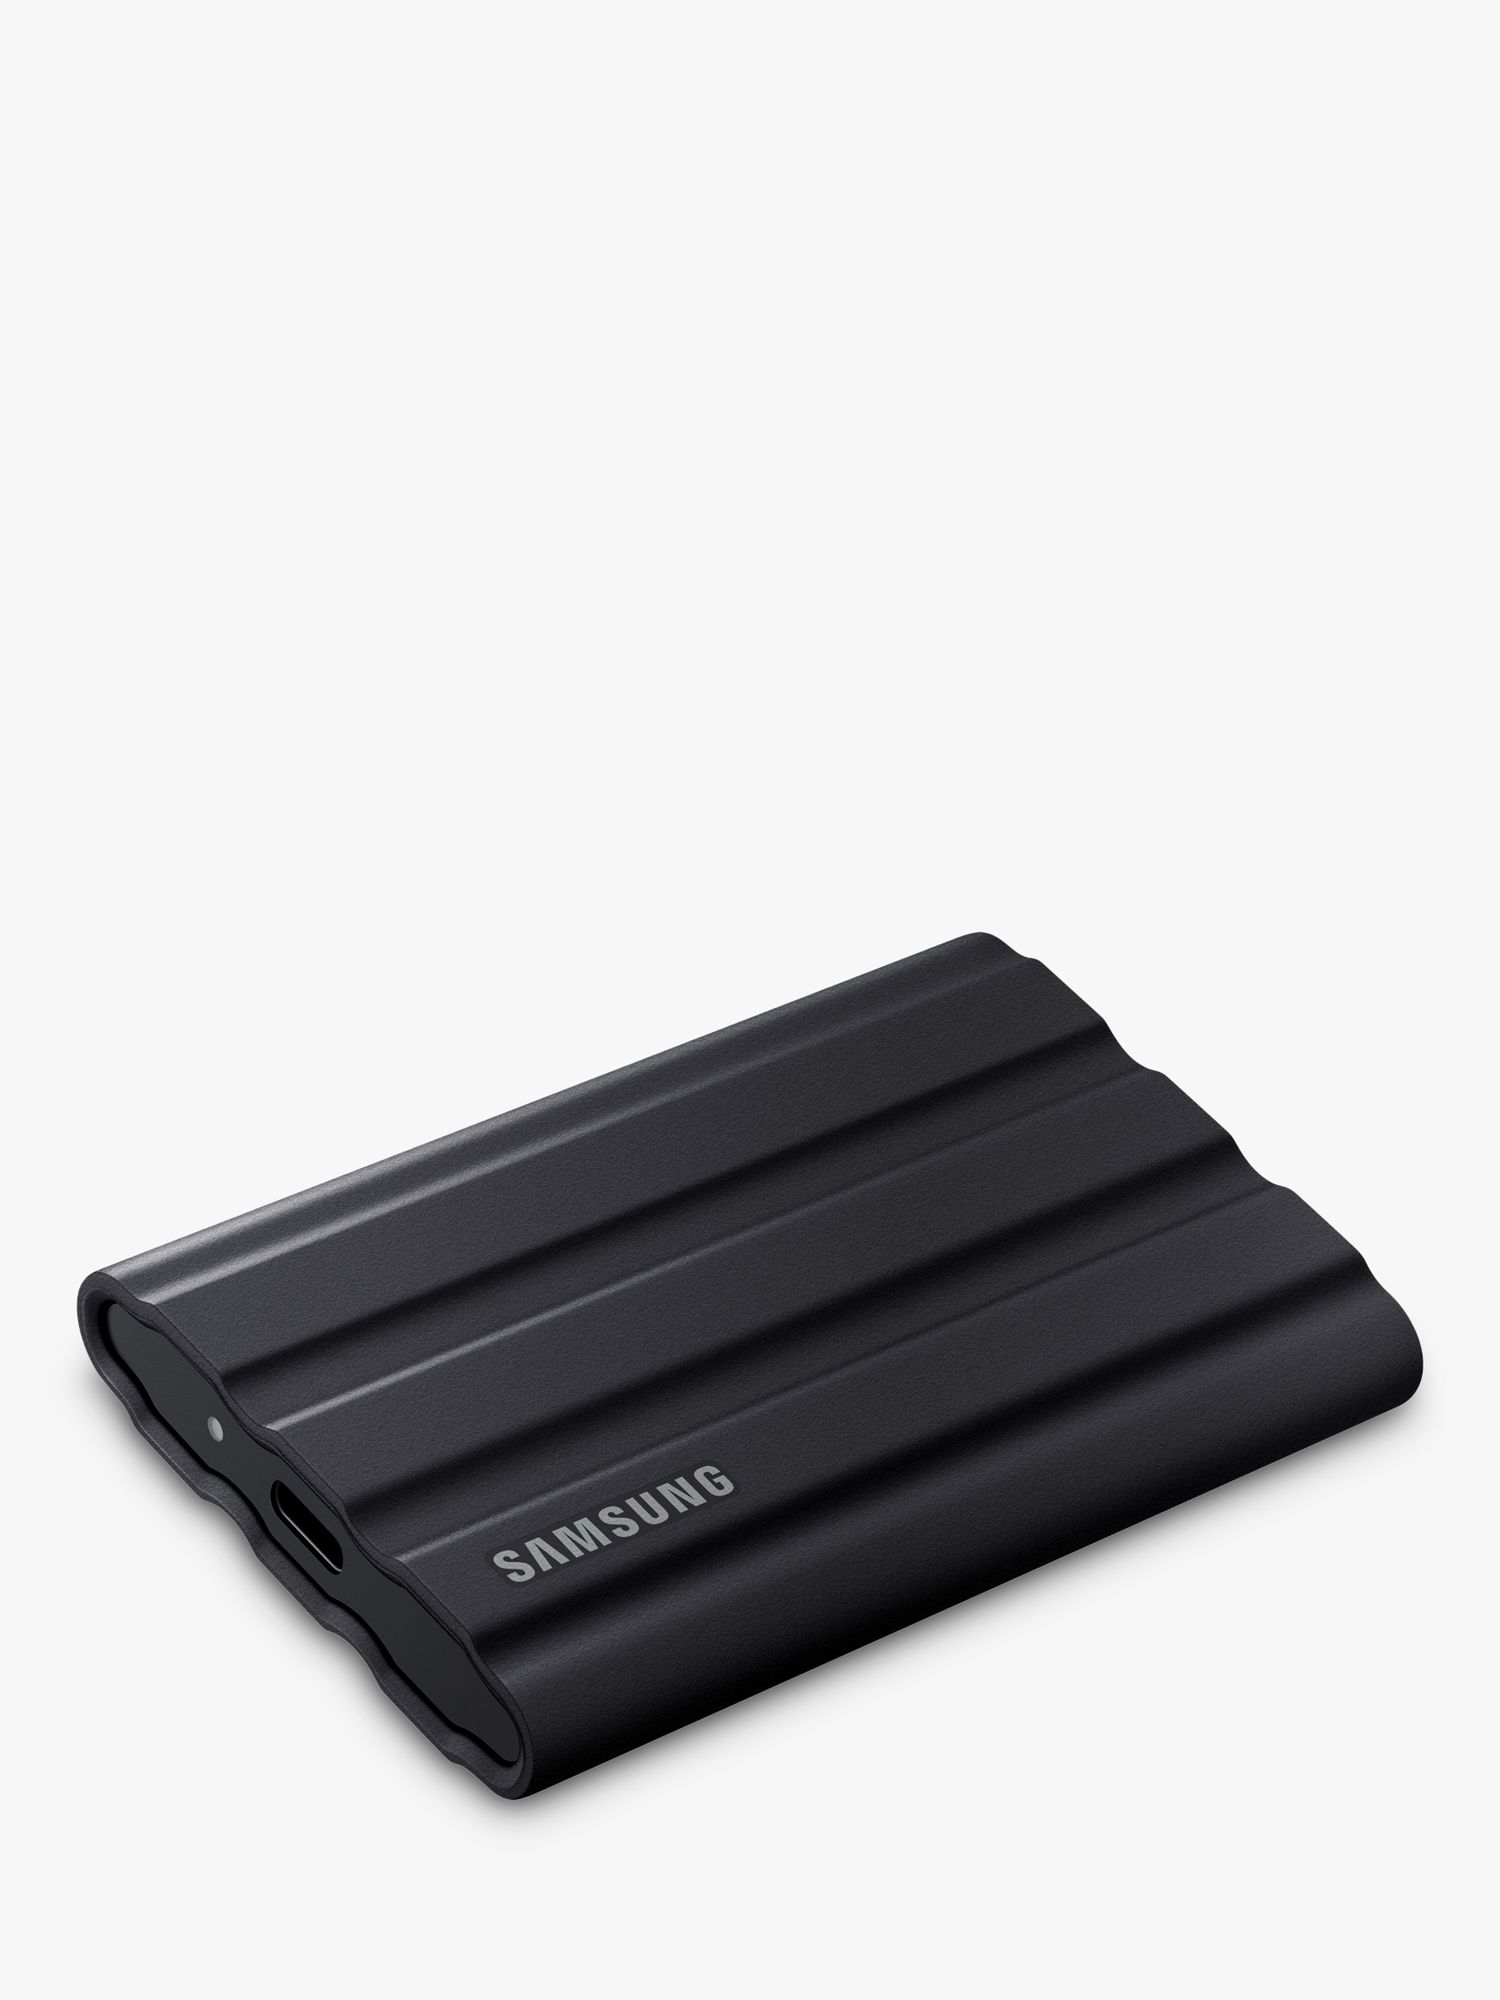 Samsung T7 Shield portable SSD review: Ultra-fast and built to last